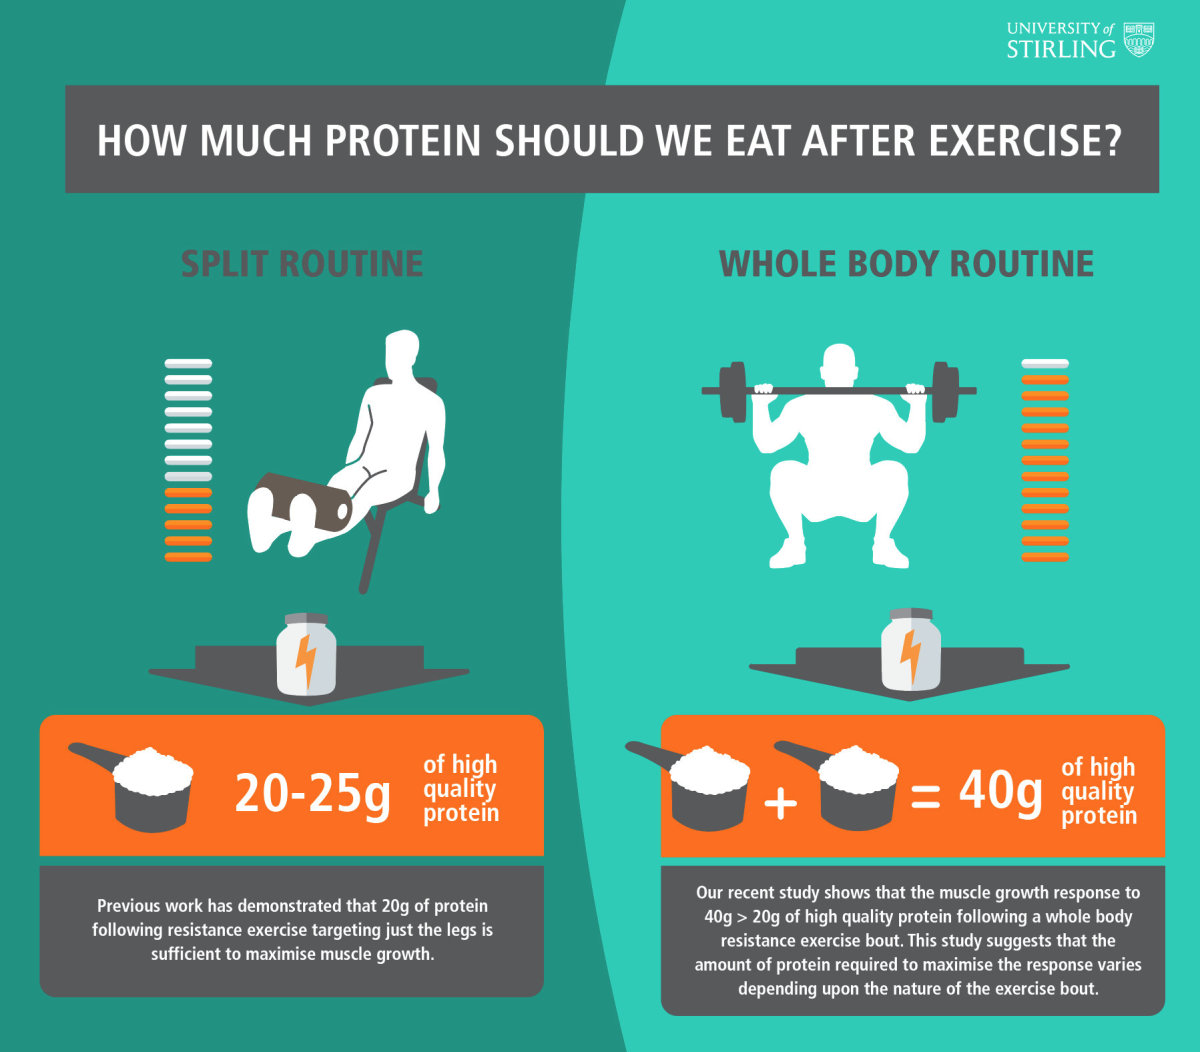 Protein intake for post-workout recovery